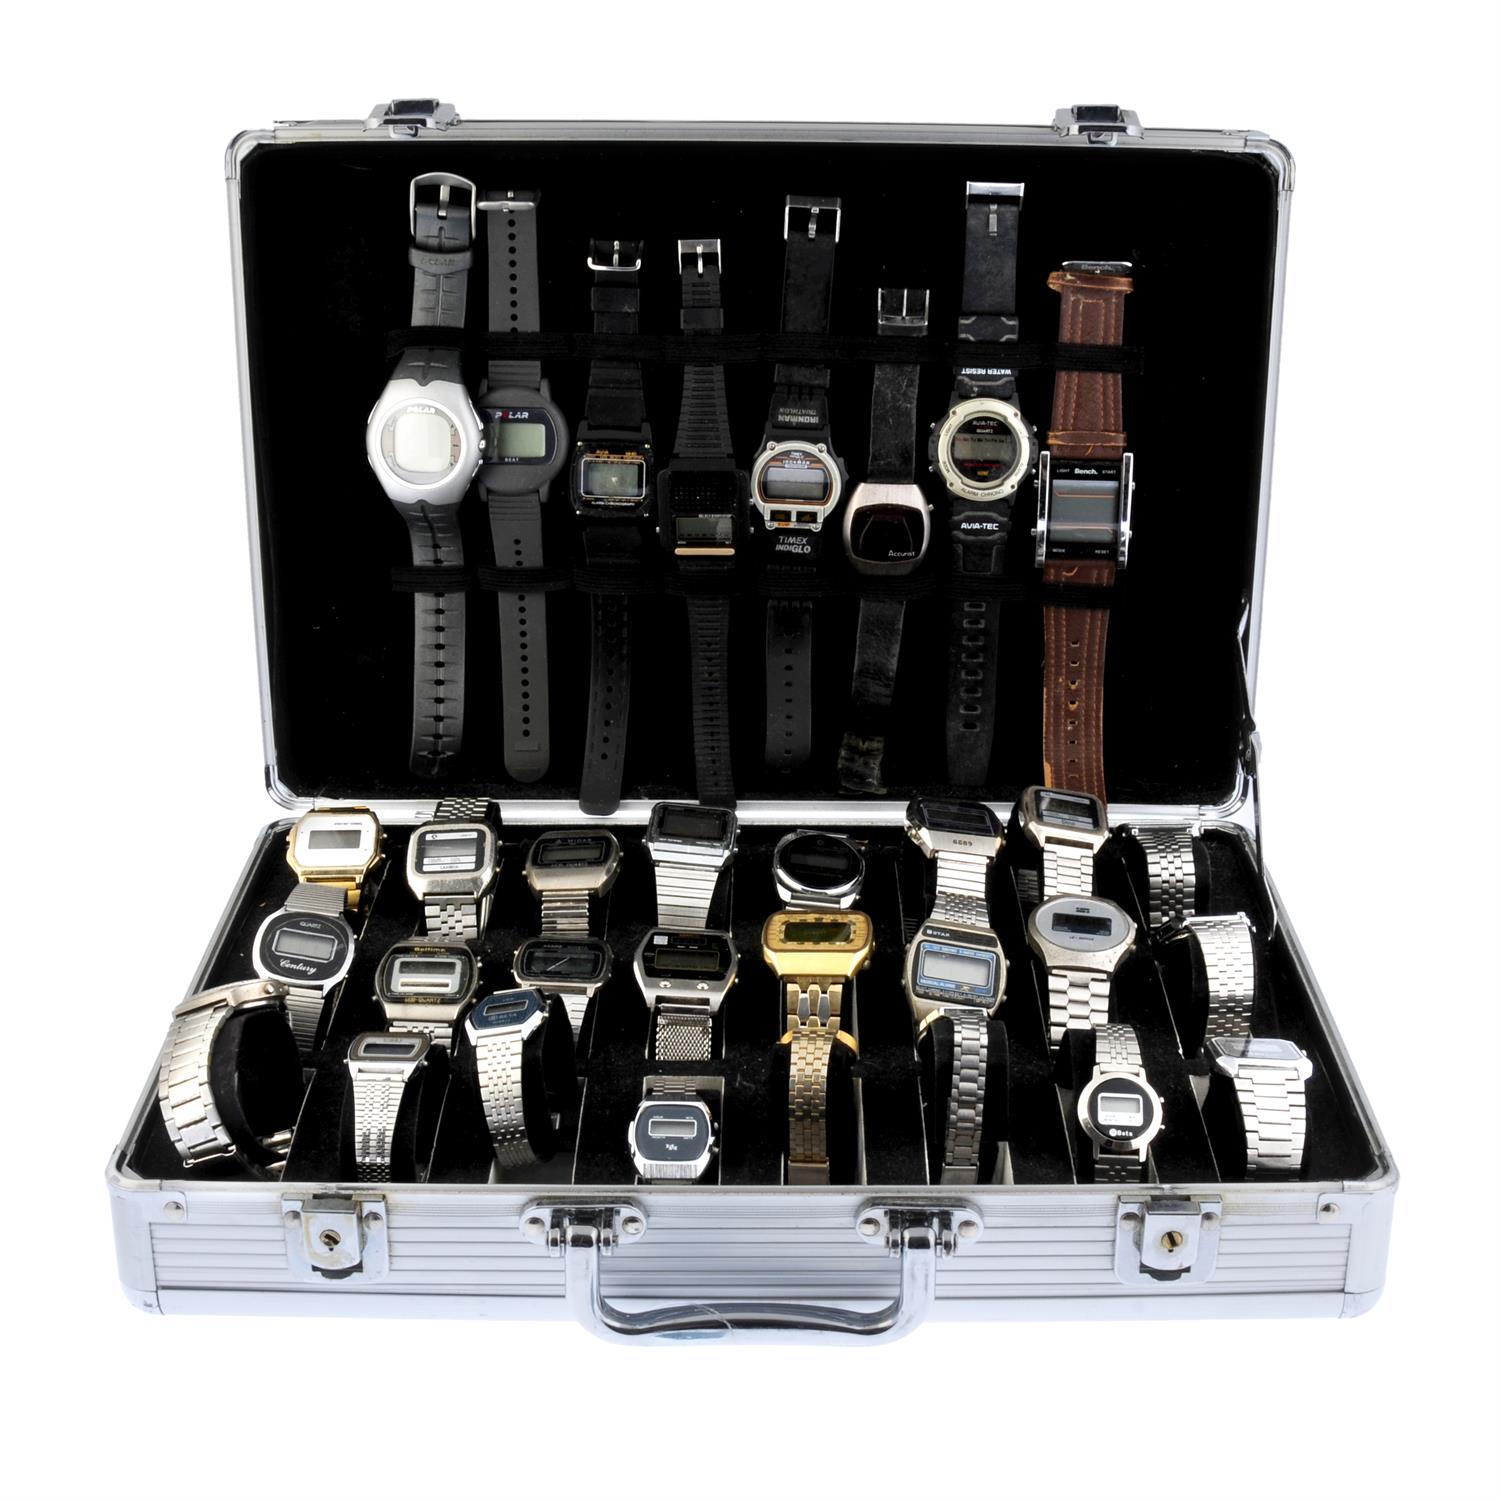 A group of digital watches. Approximately 30.